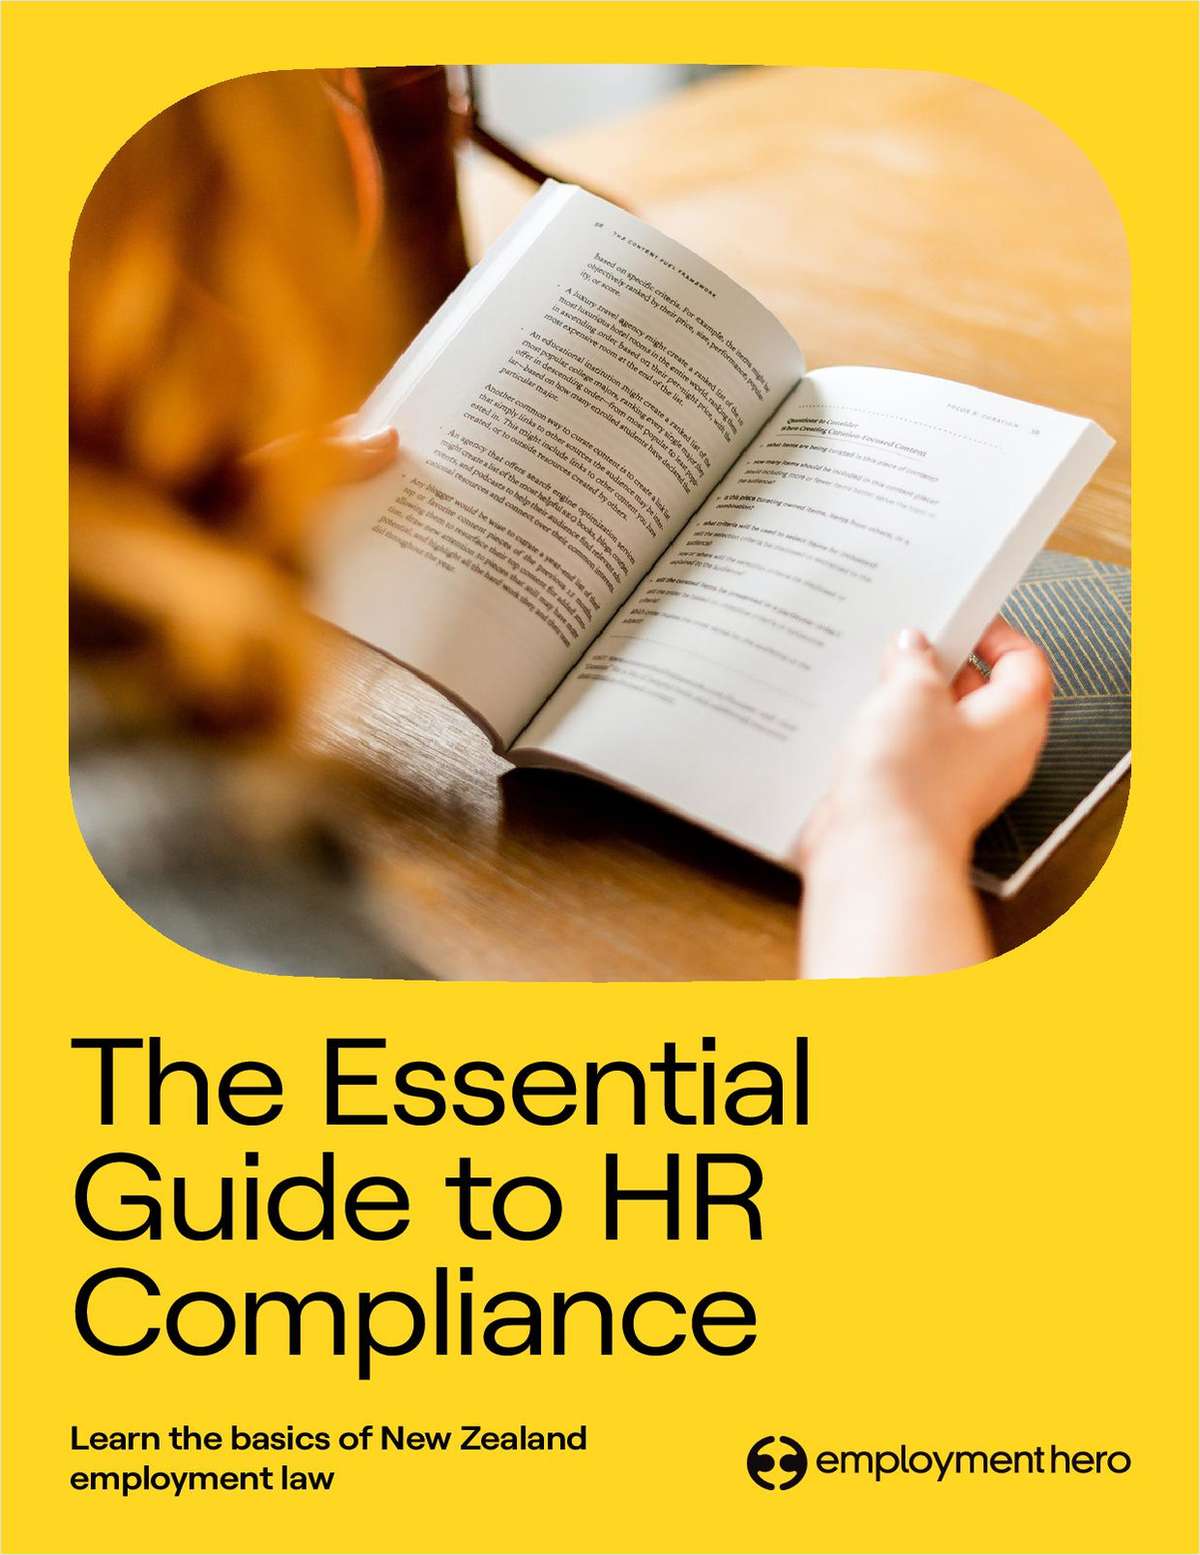 The essential guide to HR compliance